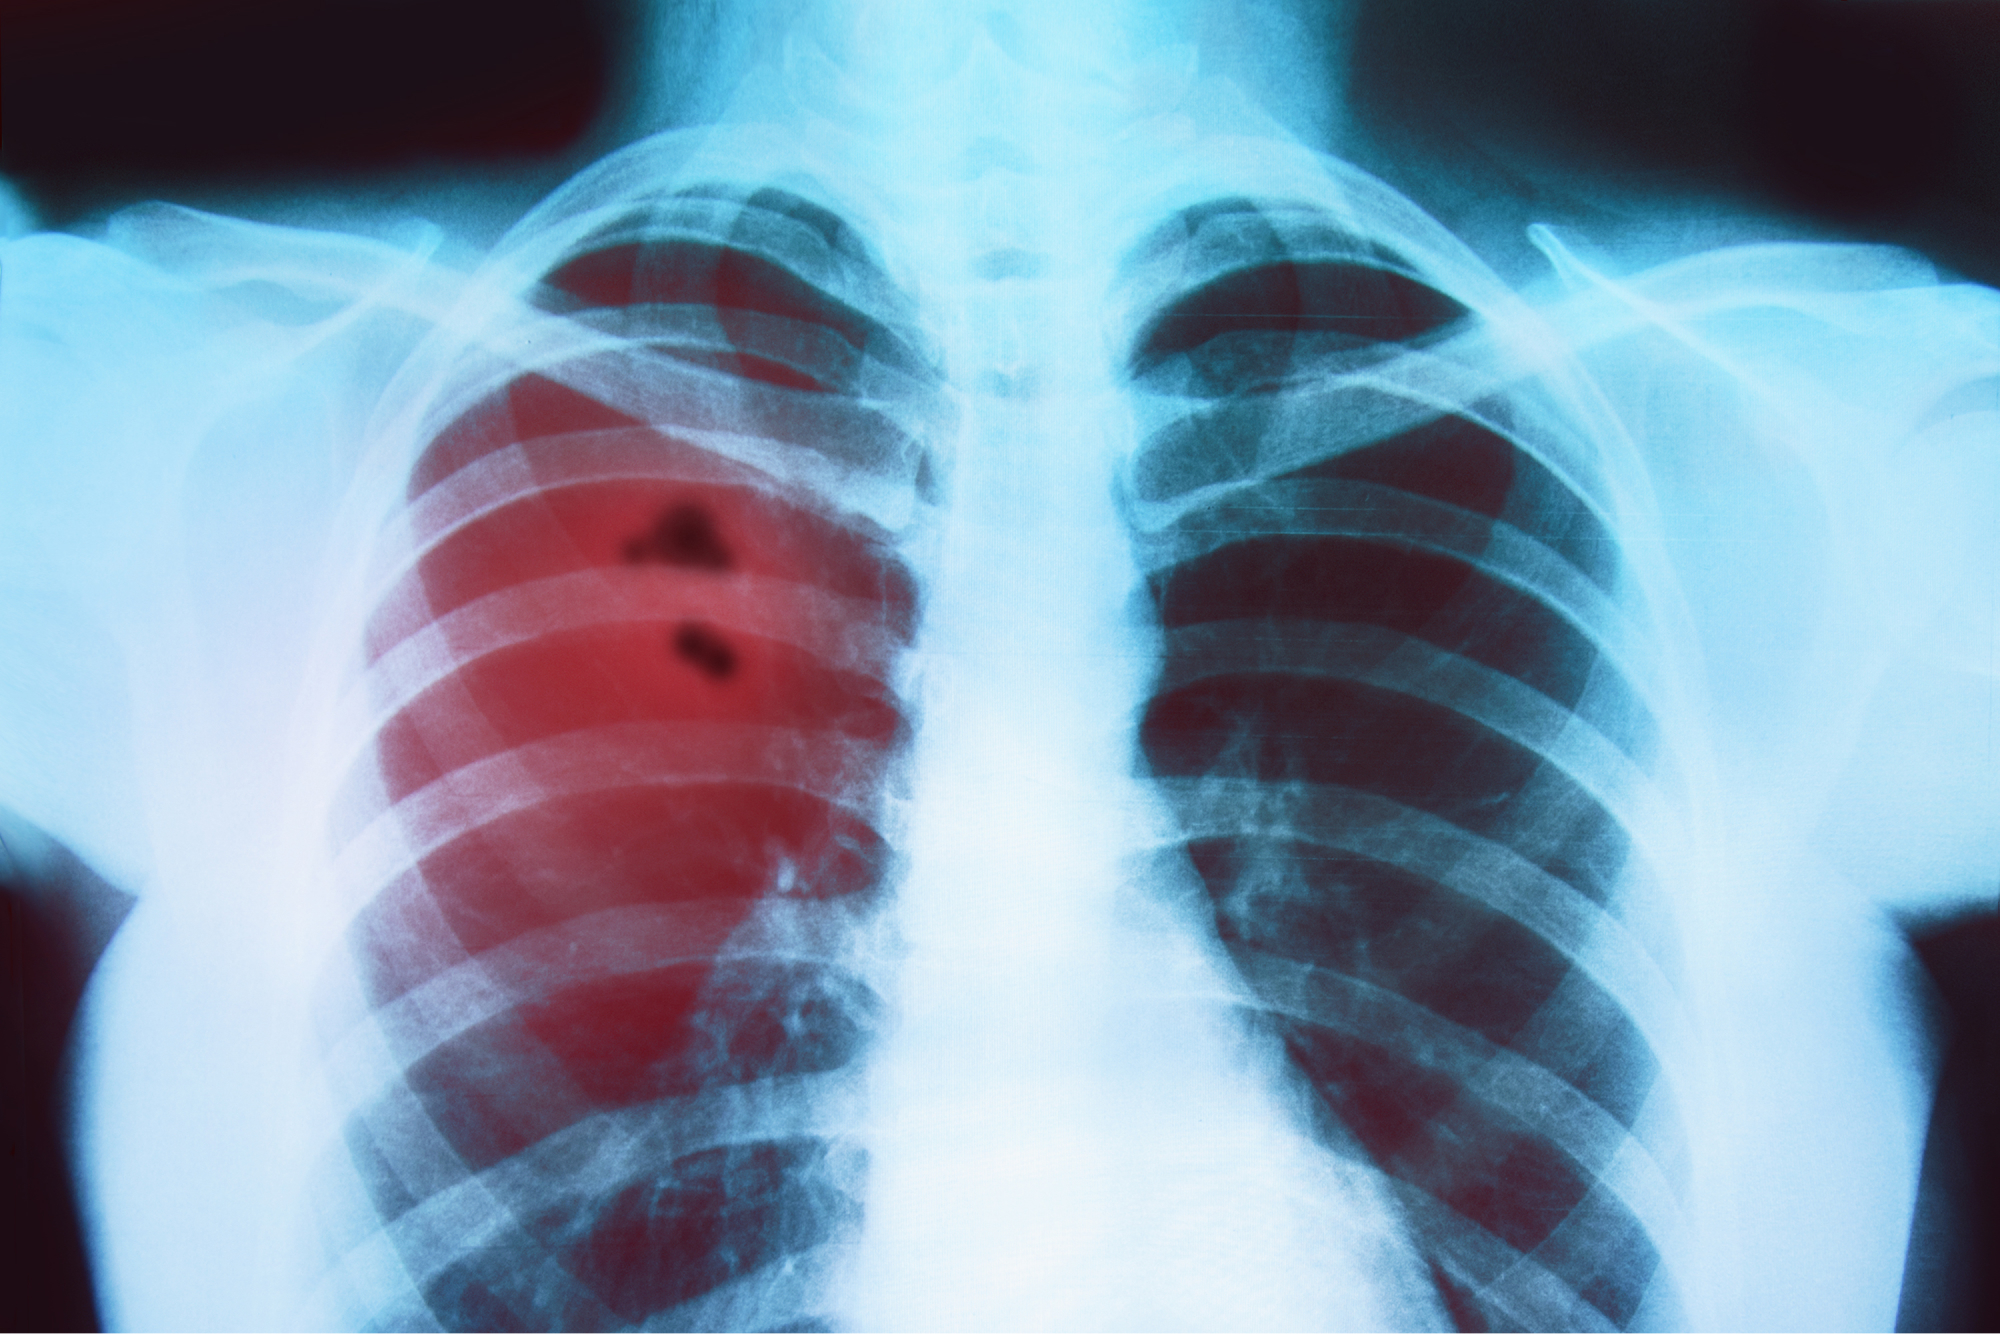 Building Urgency to Diagnose and Treat Lung Cancer